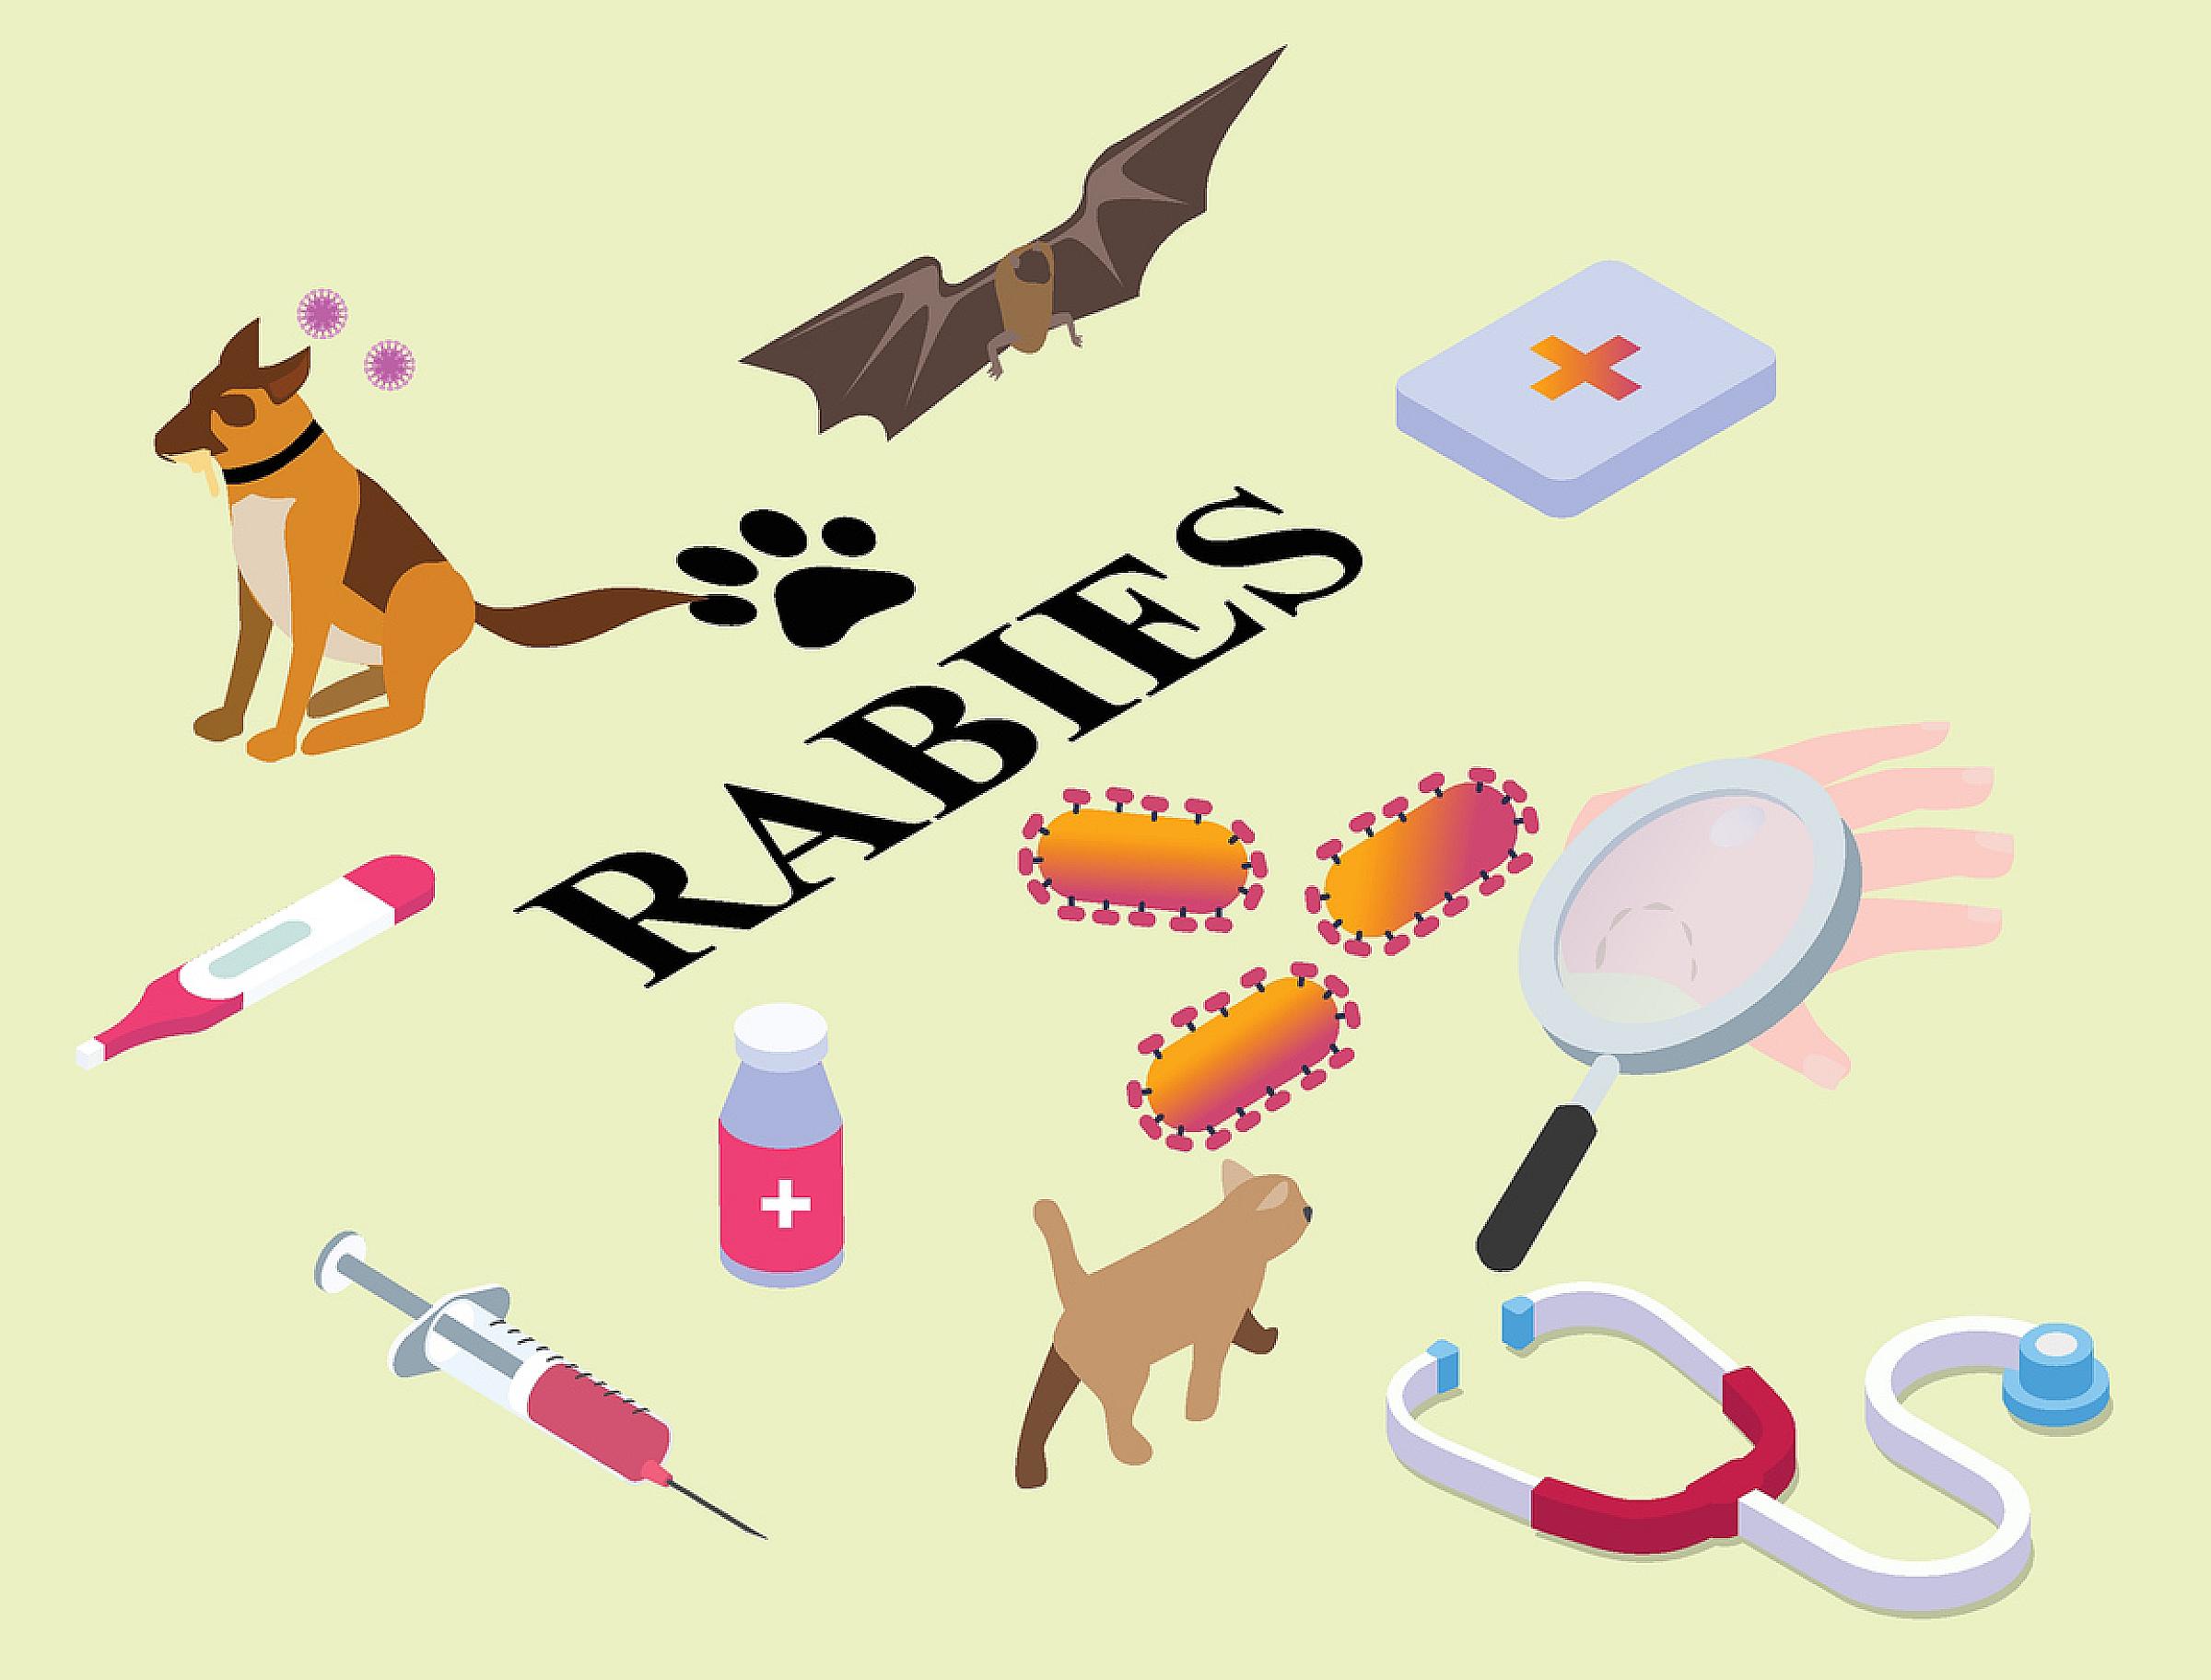 Animals and medical treatment related to rabies